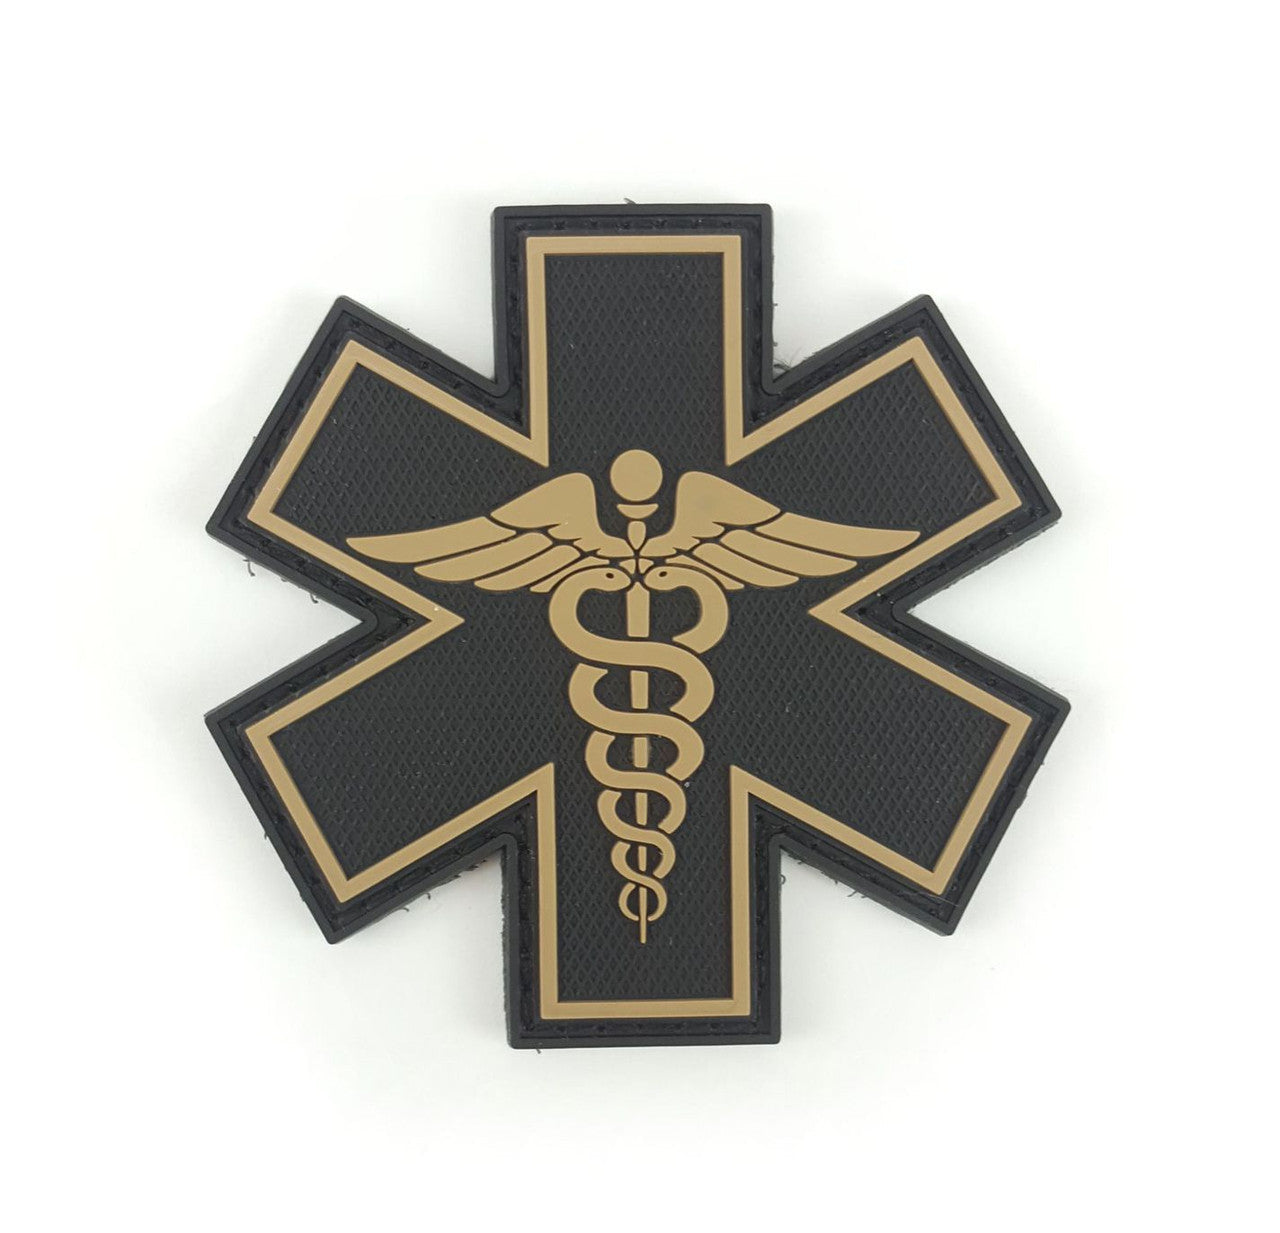 TIC Patch - MEDICAL RESPONDER STAR OF LIFE DUAL SNAKE